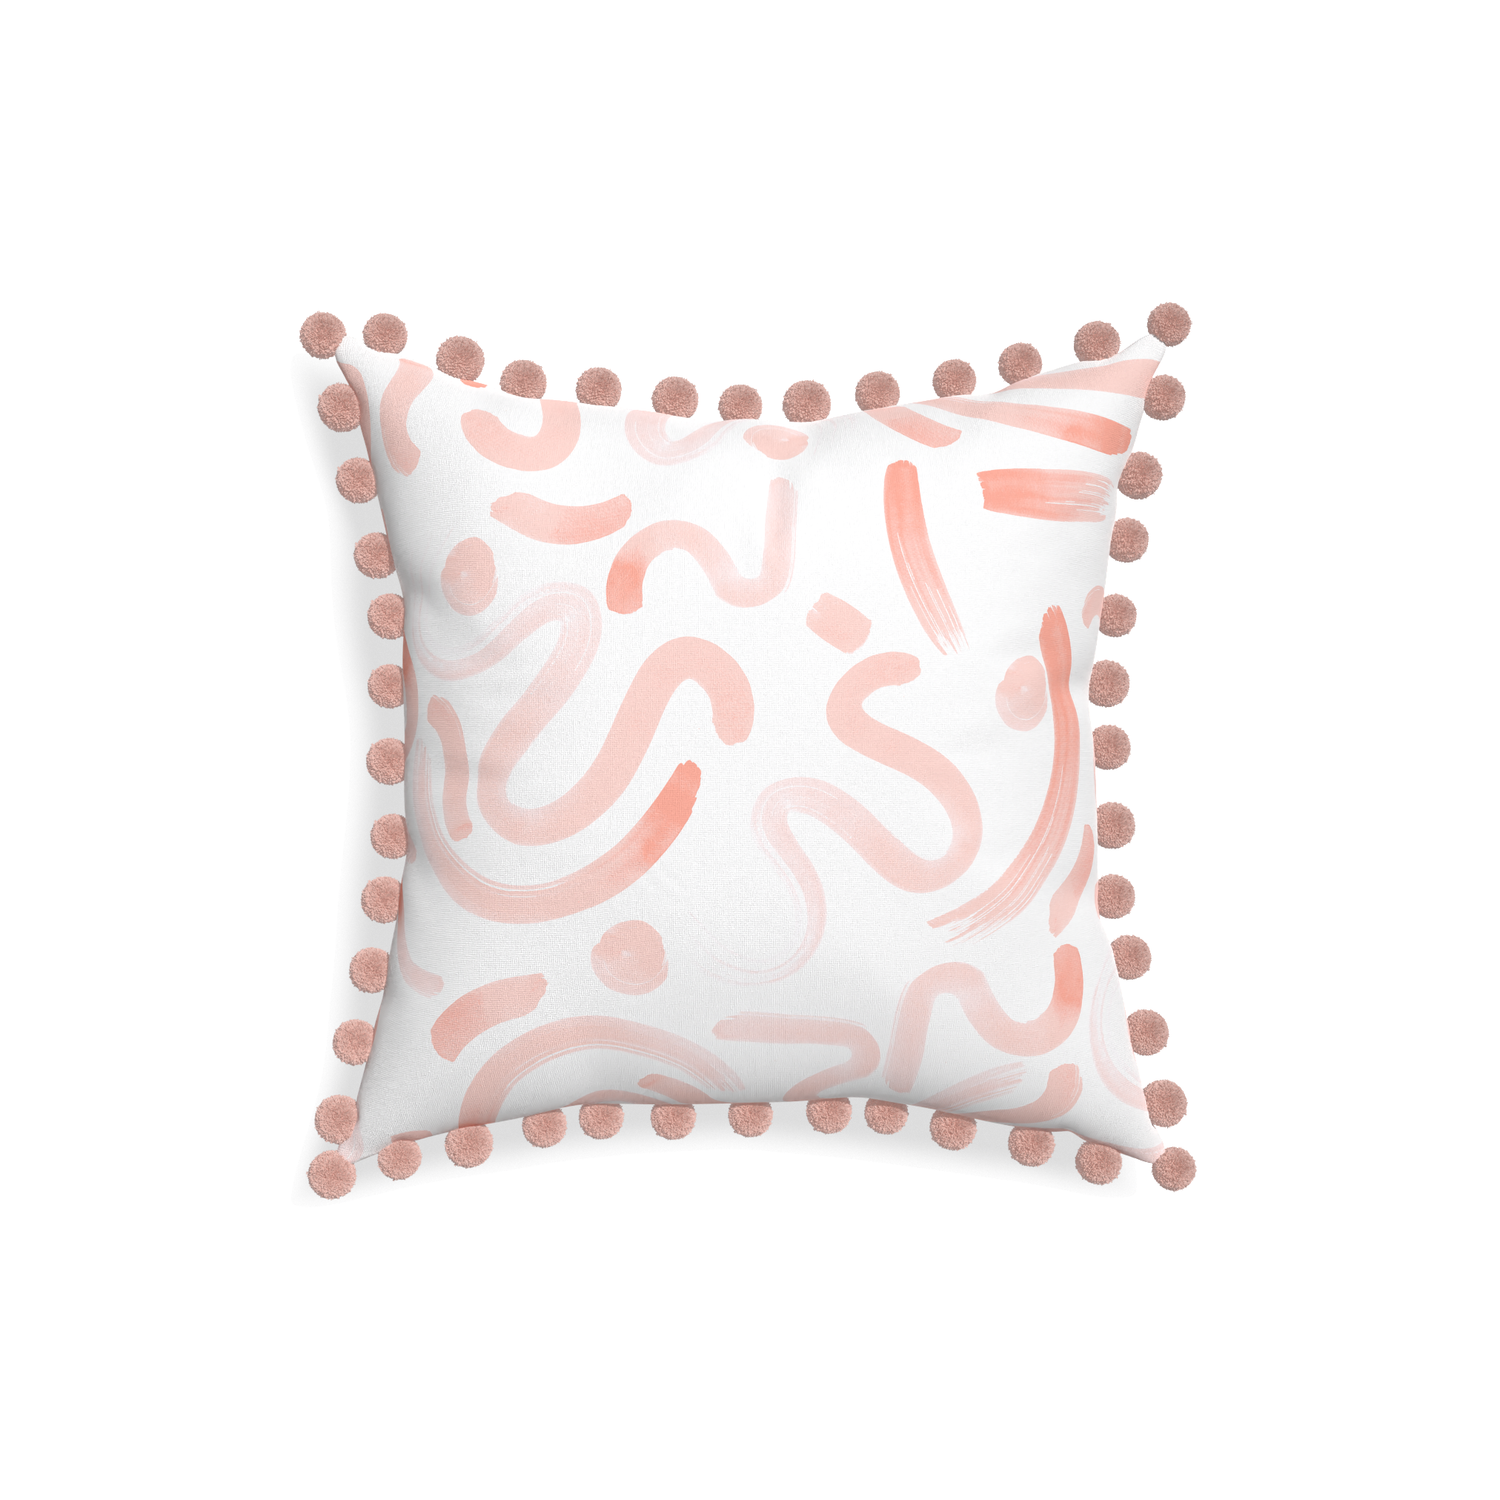 18-square hockney pink custom pink graphicpillow with rose pom pom on white background